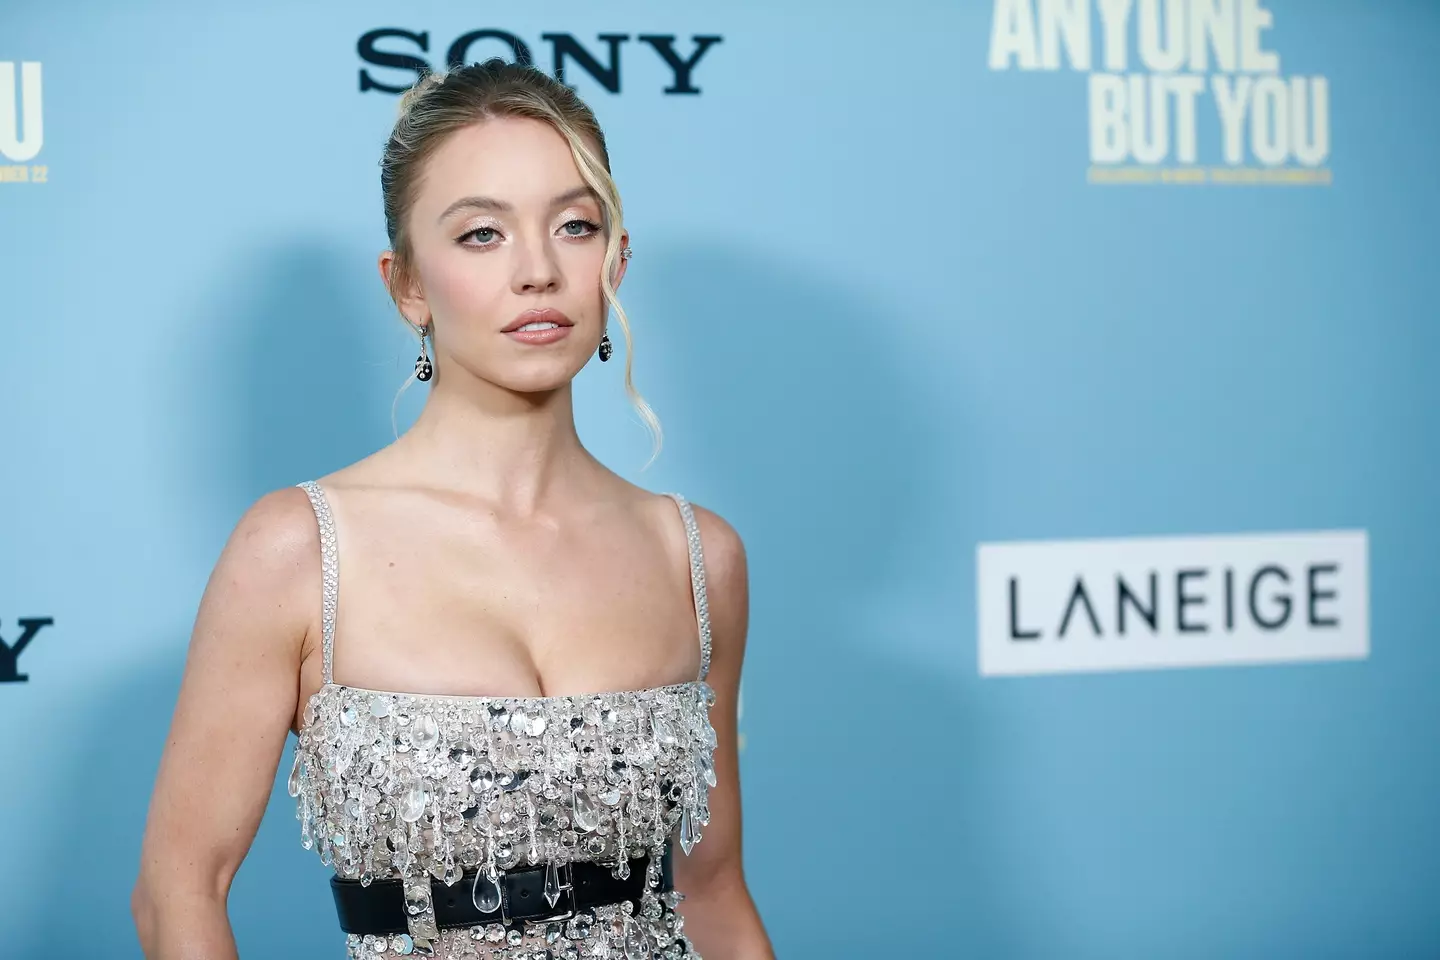 Sydney Sweeney has been in the spotlight from a young age.